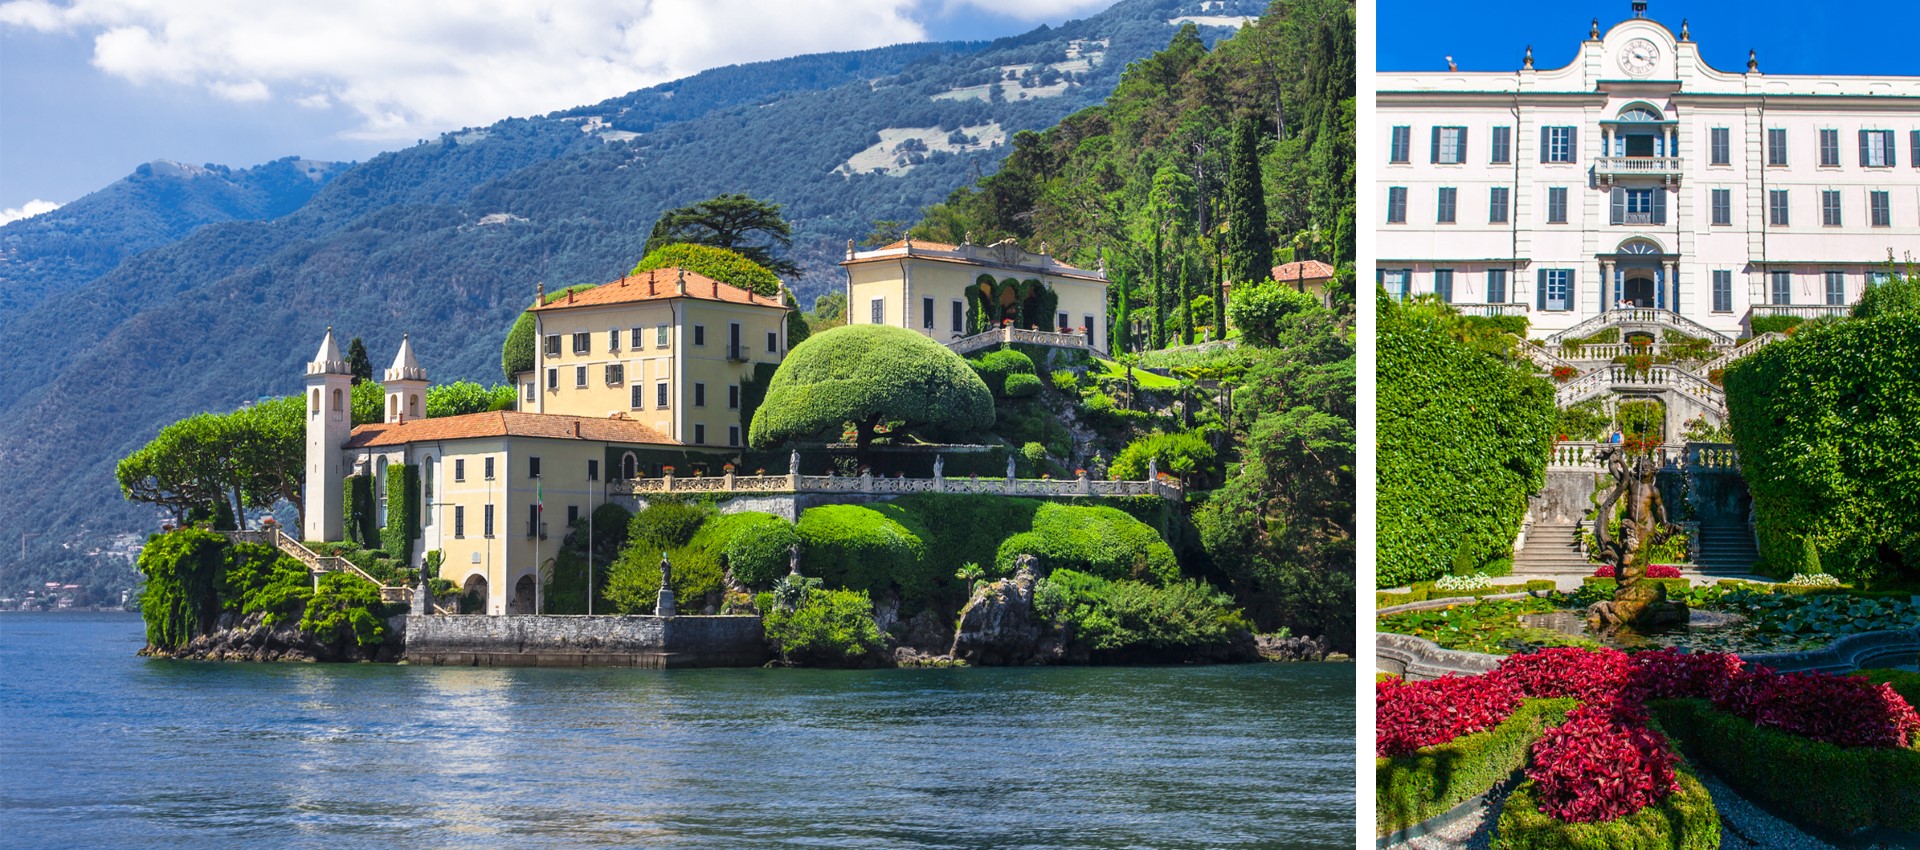 Luxury villas renting for luxury destination weddings and bespoke private events in Lake Como by Bond wedding planner in Italy